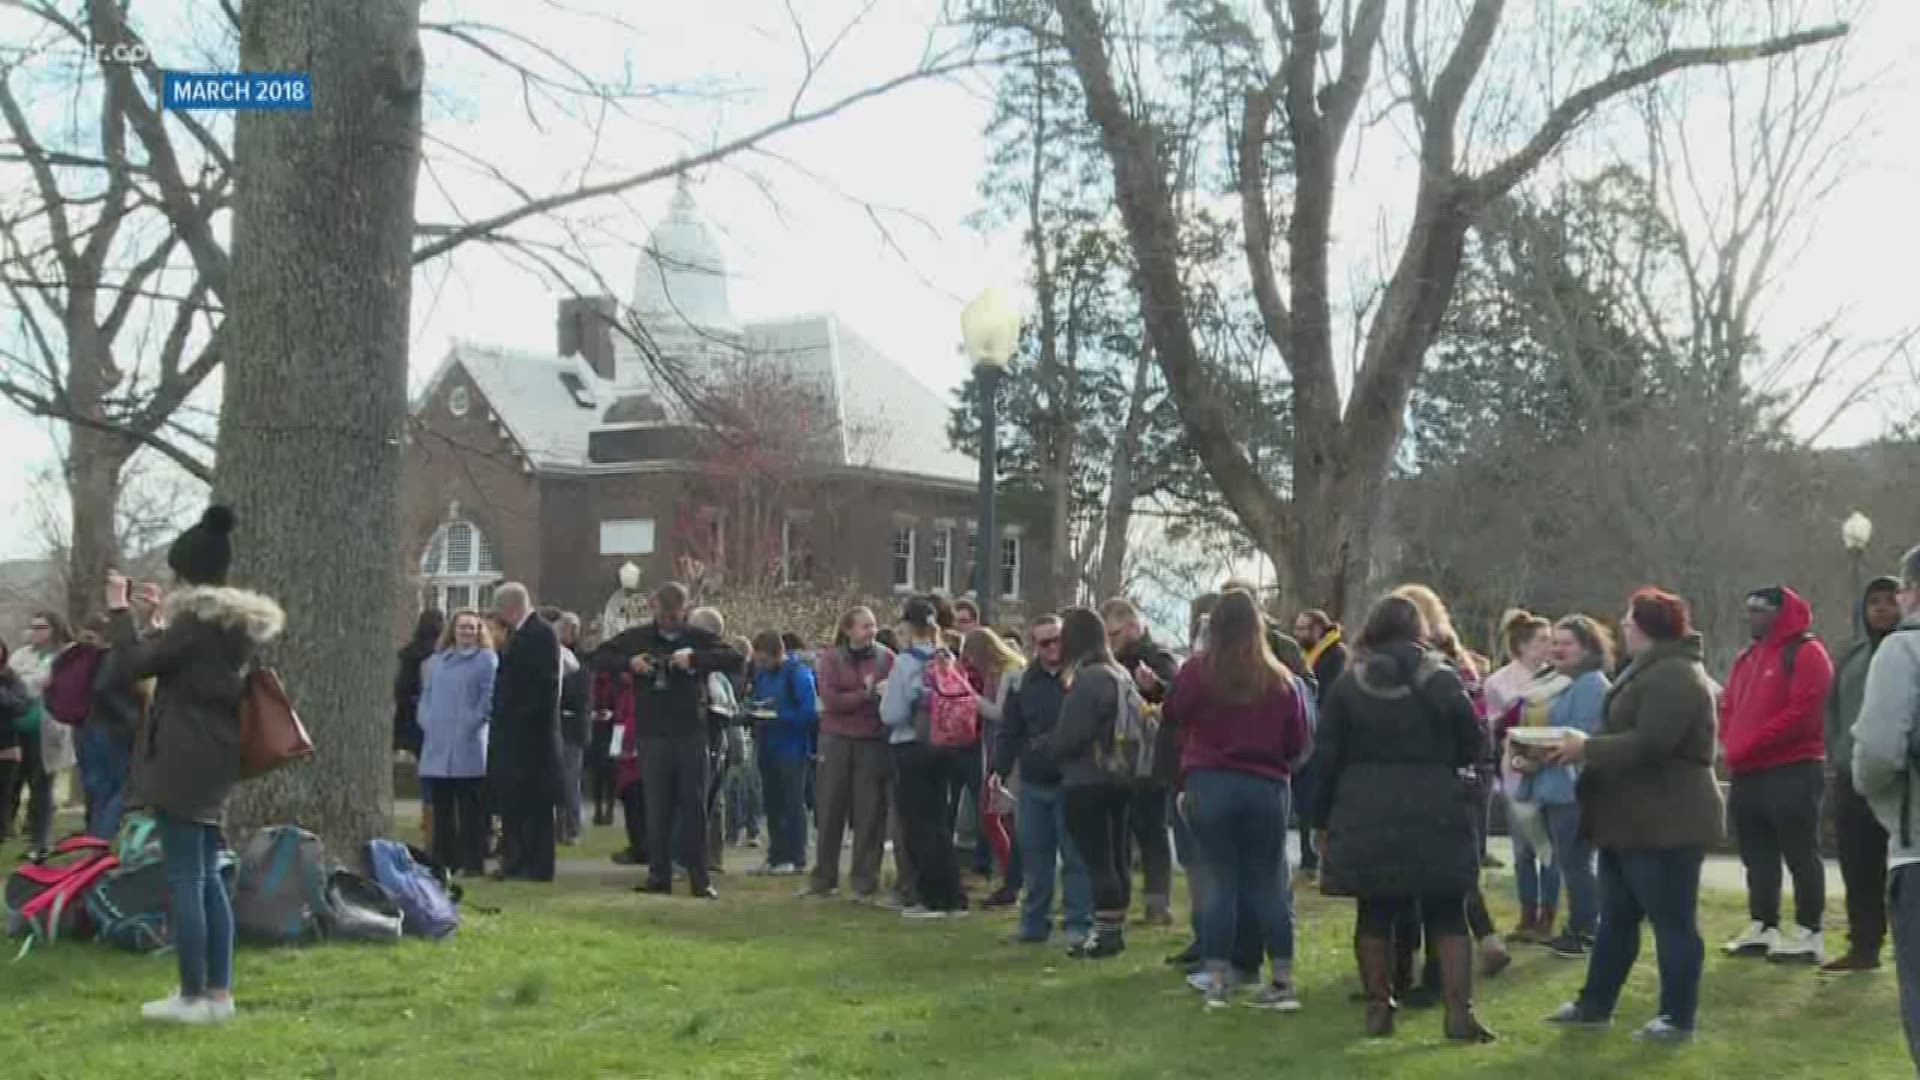 Students in East Tennessee and thousands of others across the country plan walkouts.